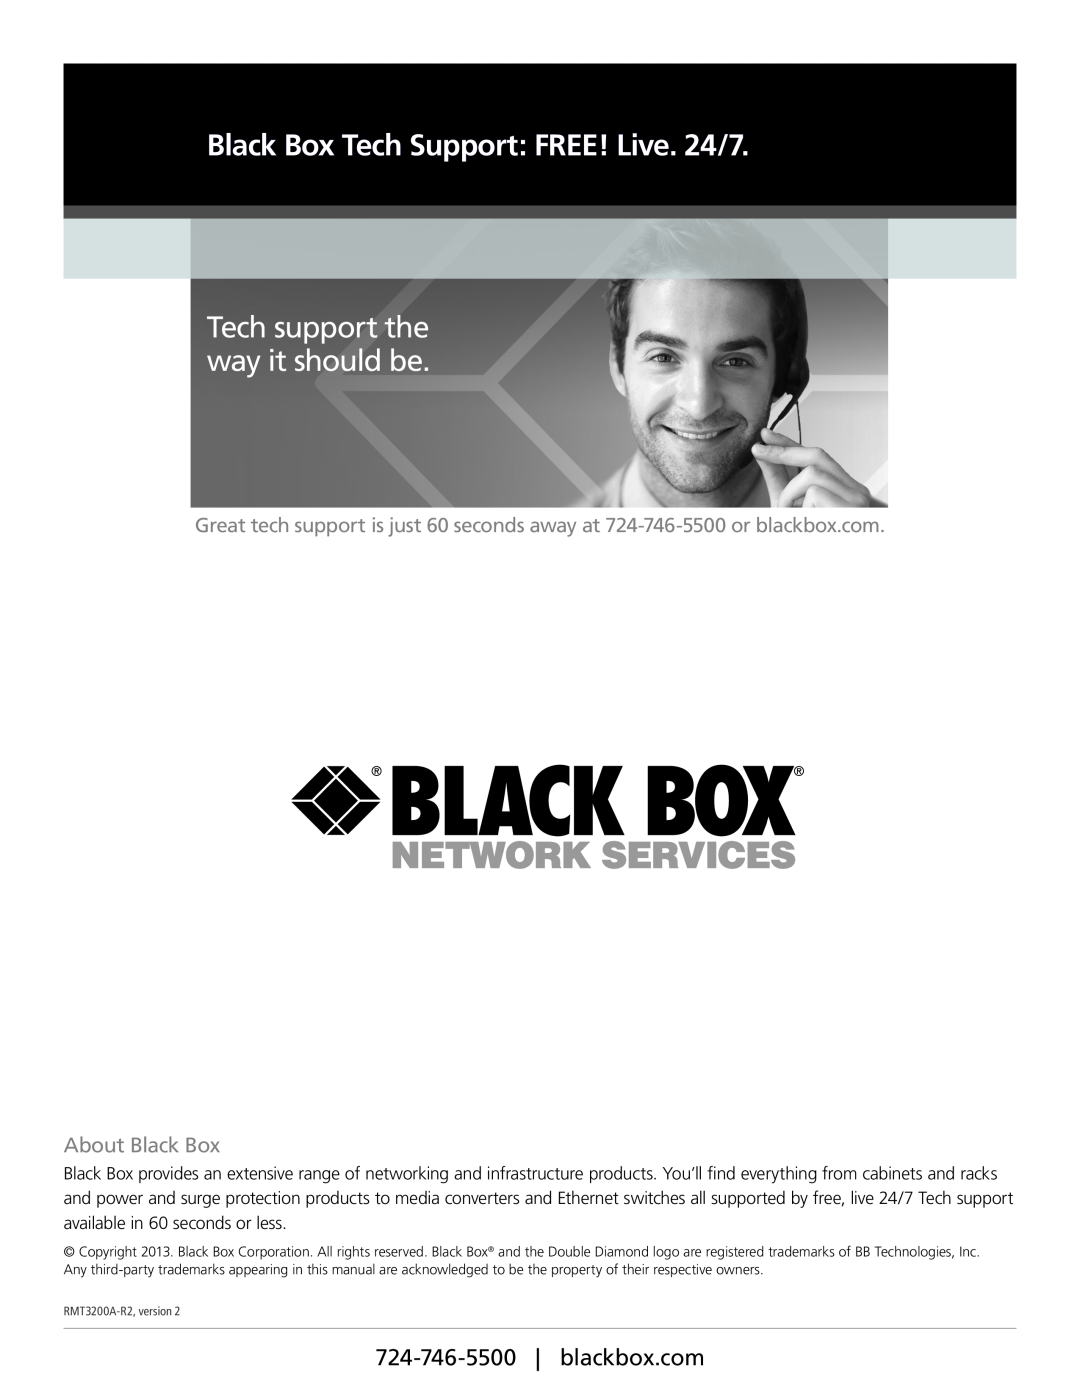 Black Box RMT3200A-R2 manual Black Box Tech Support FREE! Live. 24/7, Tech support the way it should be, About Black Box 